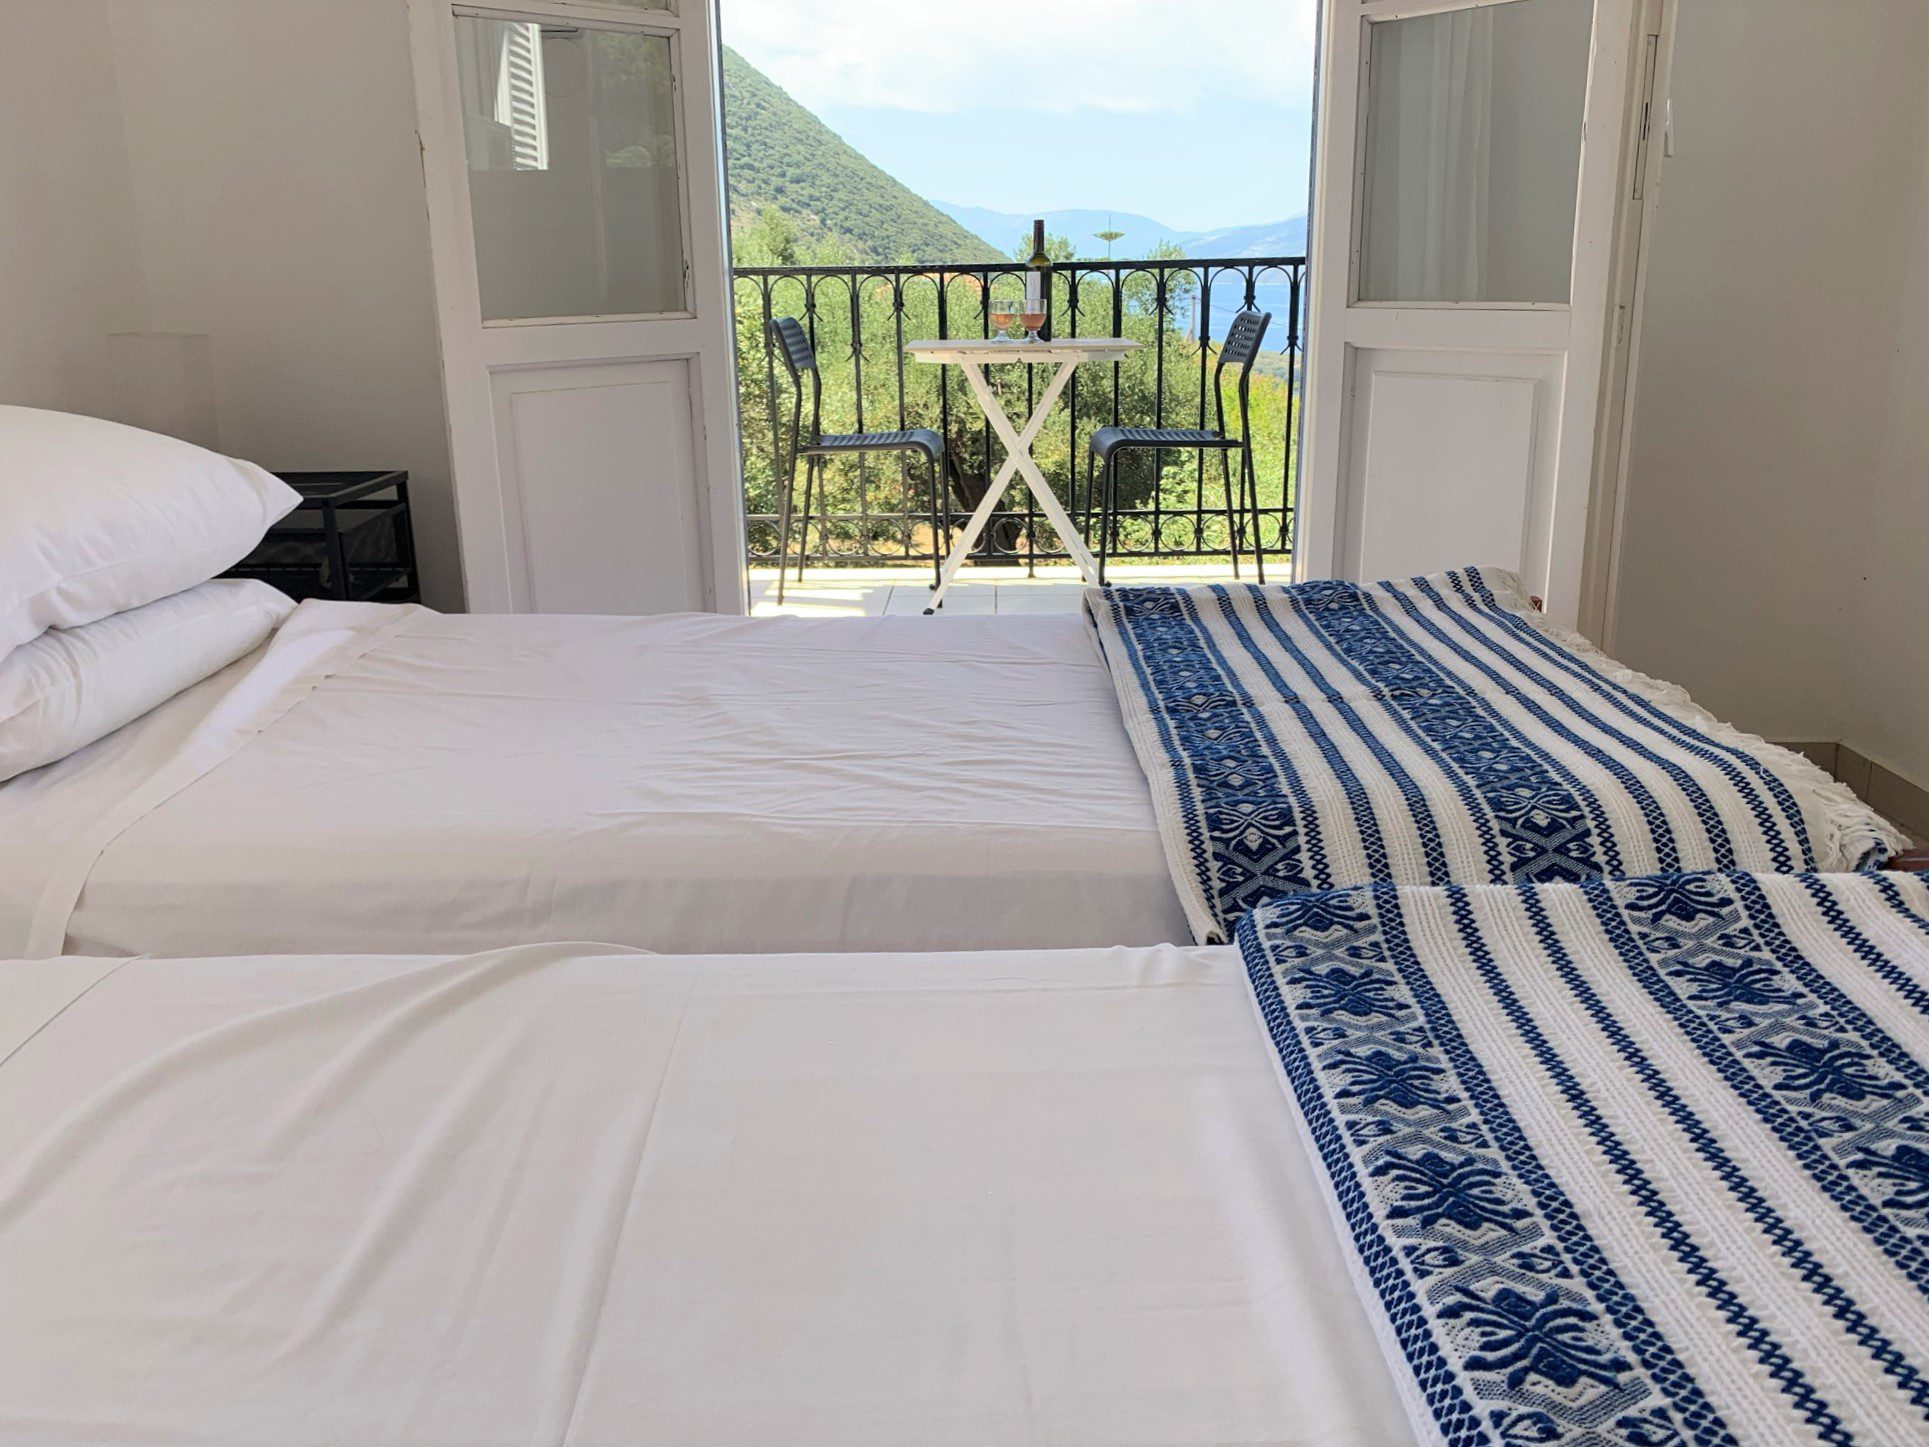 Bedroom of house for rent in Ithaca Greece Stavros